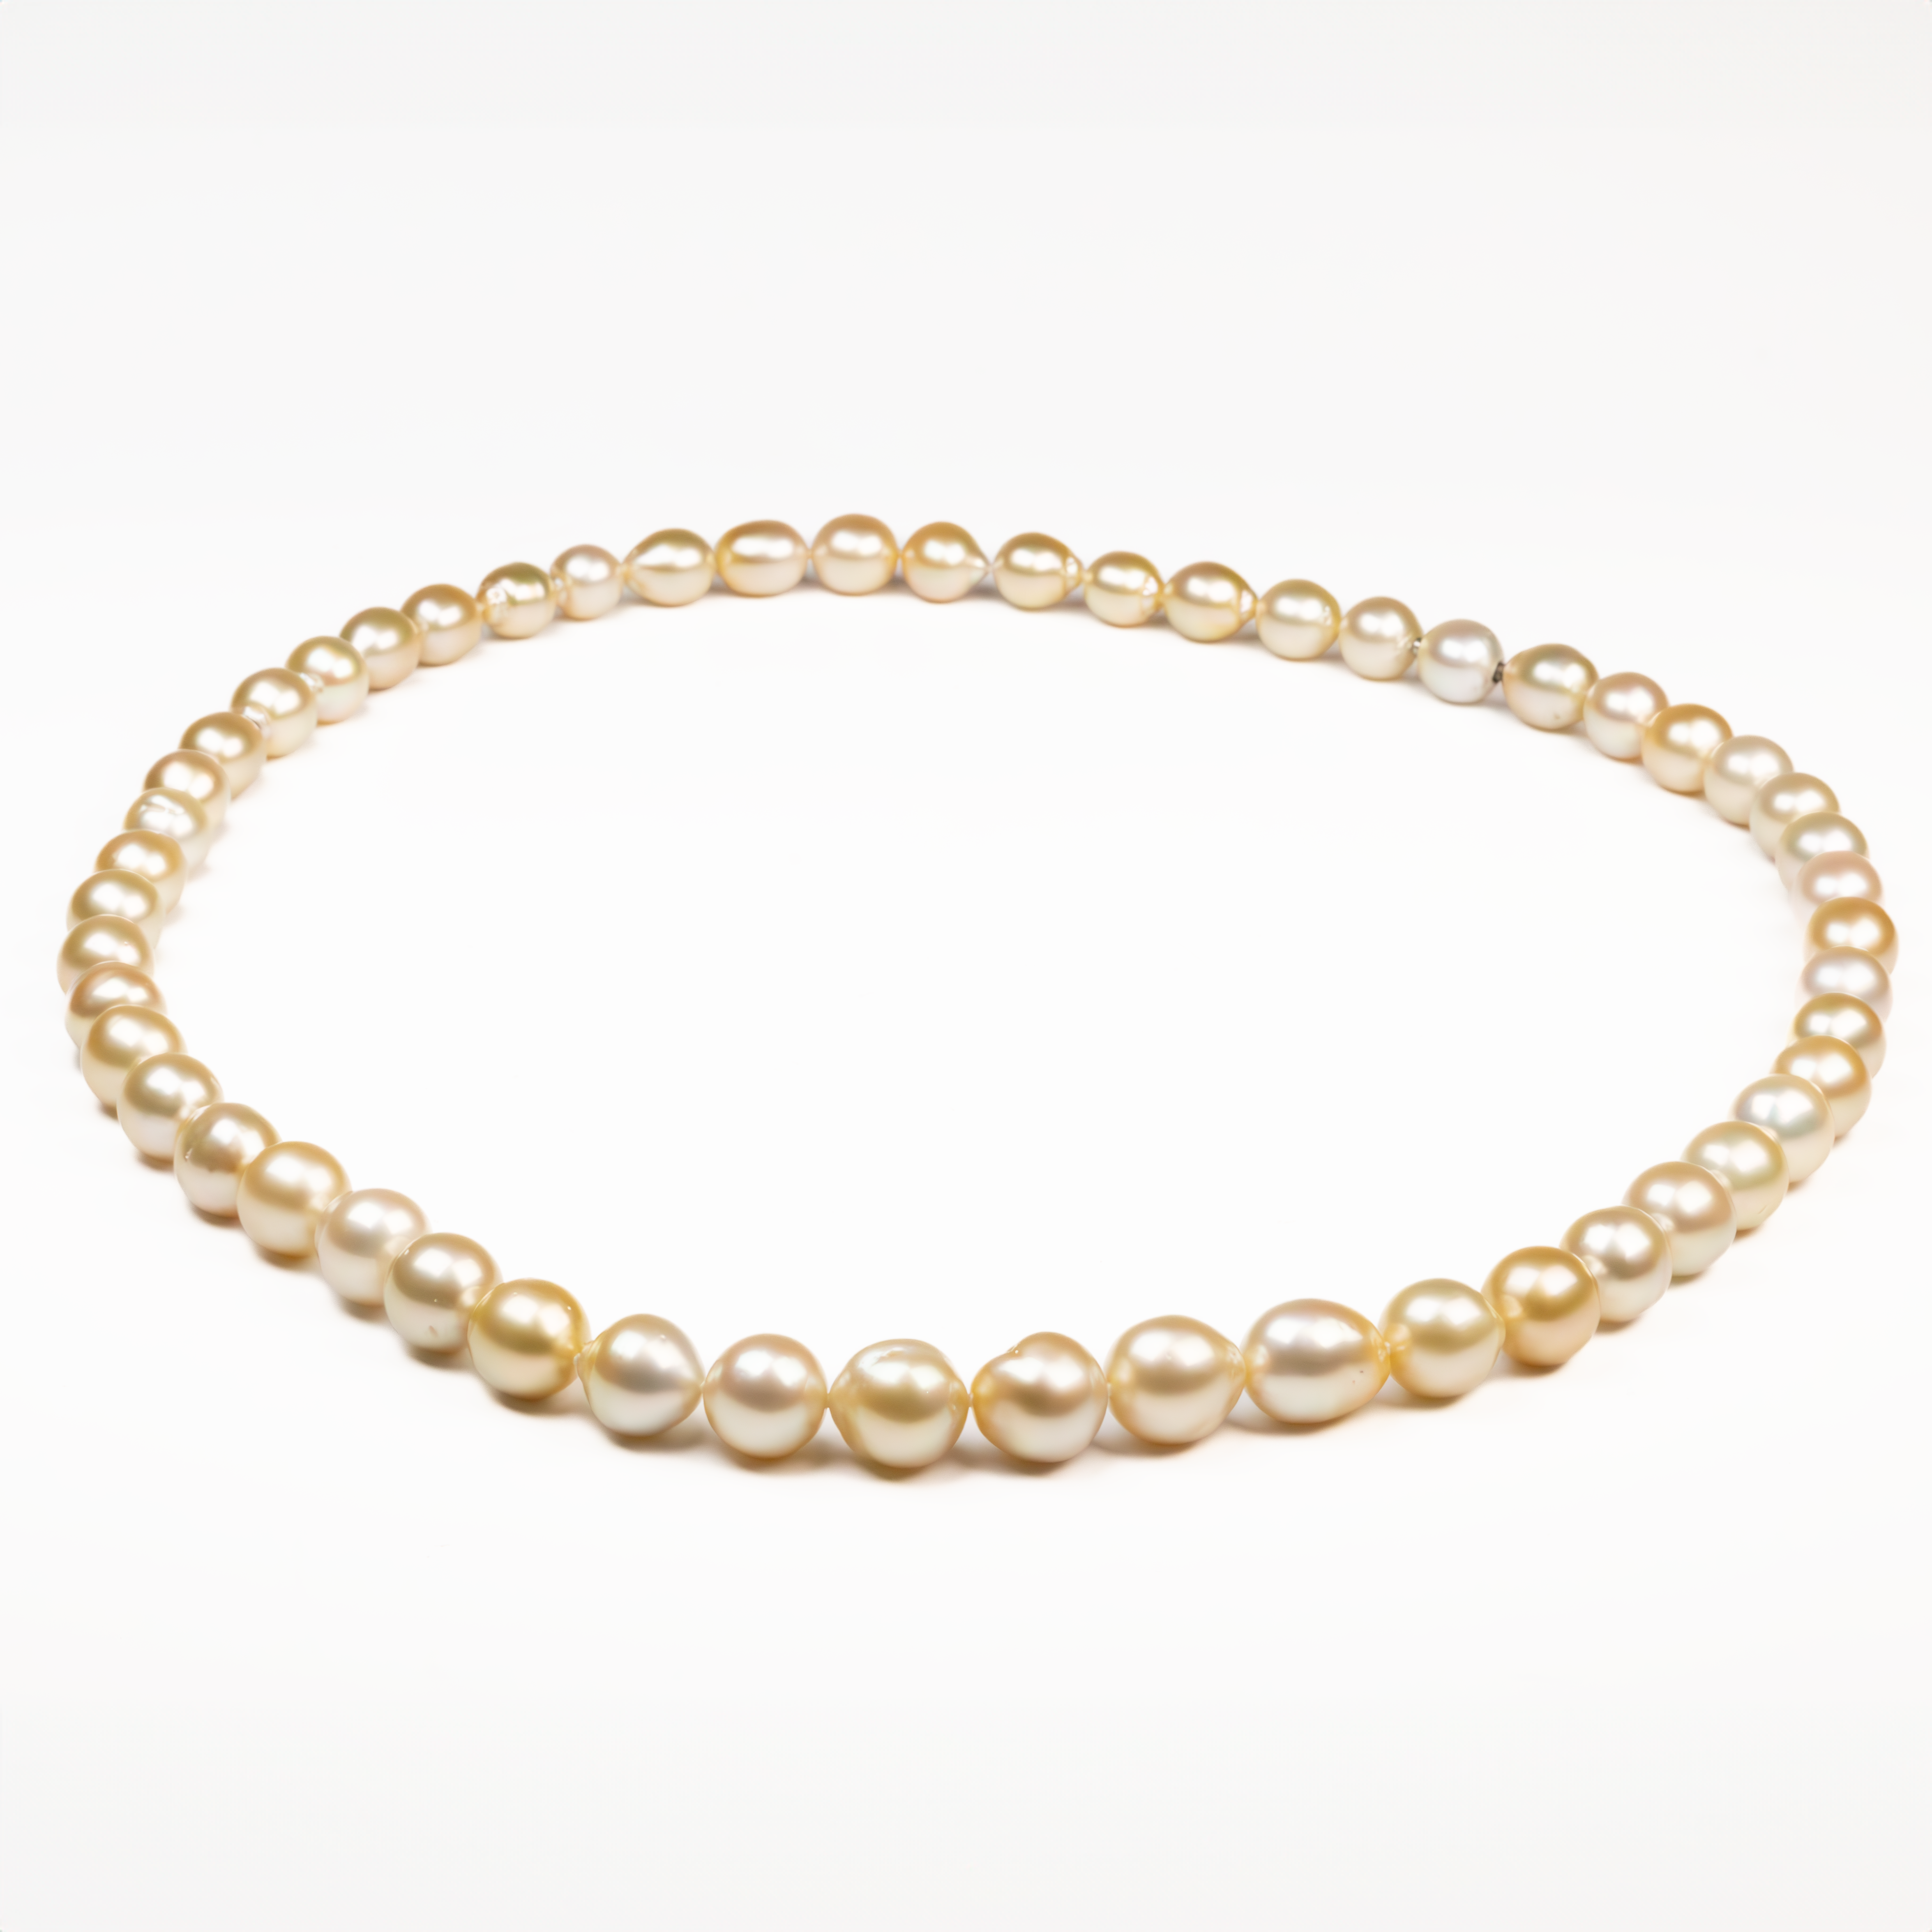 Stainless Steel South Sea Cultured 10.20-13.00mm 70cm Pearl Strand